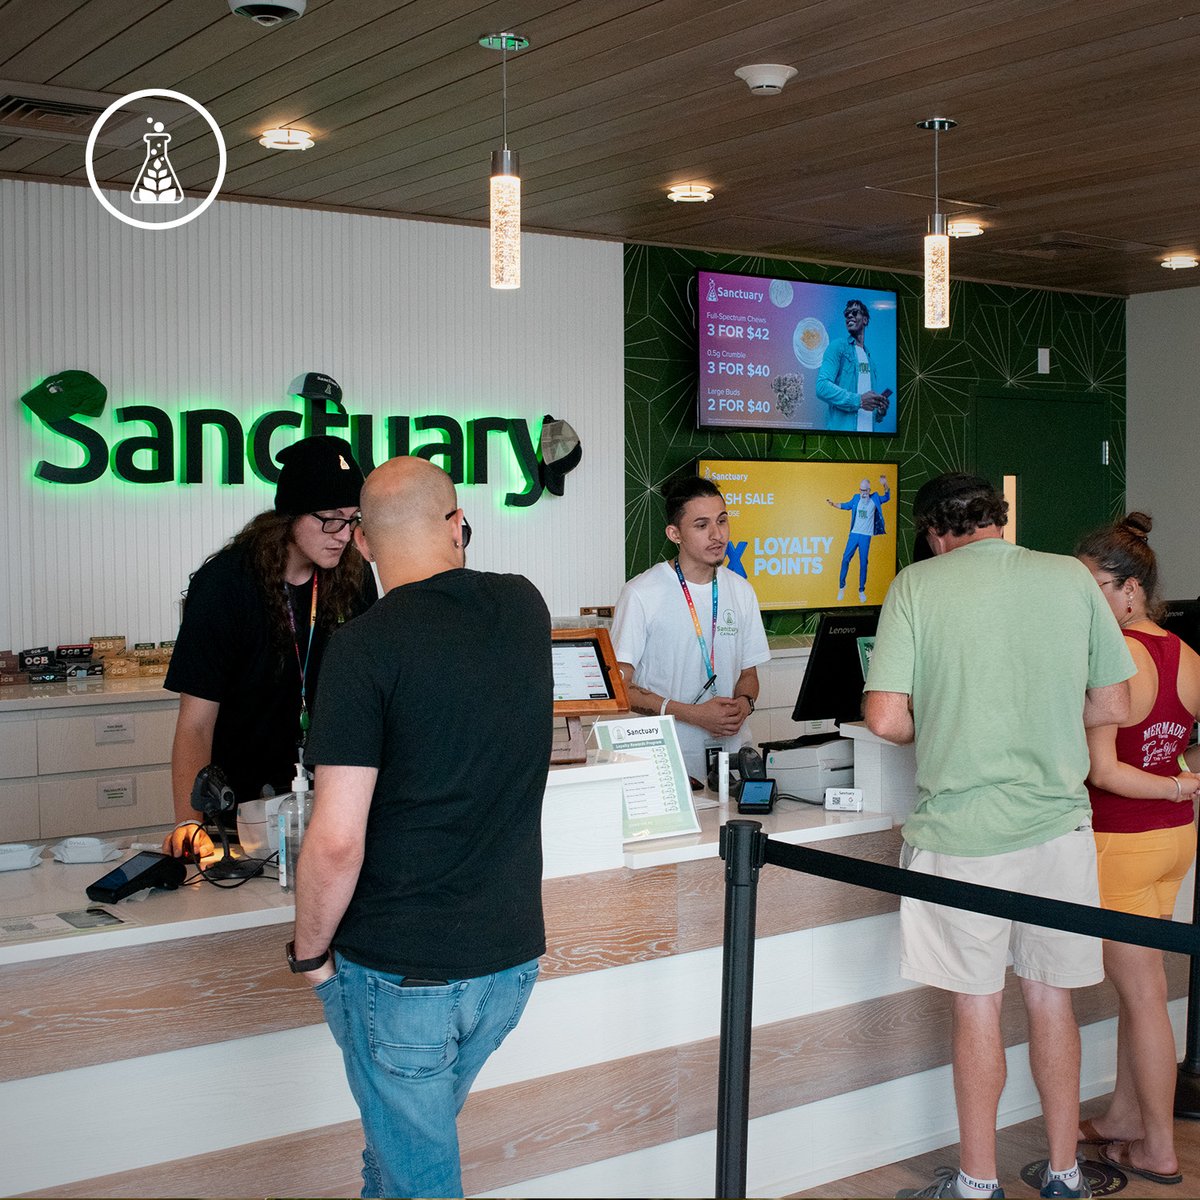 Our butenders are ready to assist patients at any level of their wellness journey. Whether you are a new patient exploring your options or a seasoned consumer we have the answers to help. 🍃 Sanctuary FL 🌐 sanctuarymed.com 21+ Only. Nothing for sale on IG/FB/X.